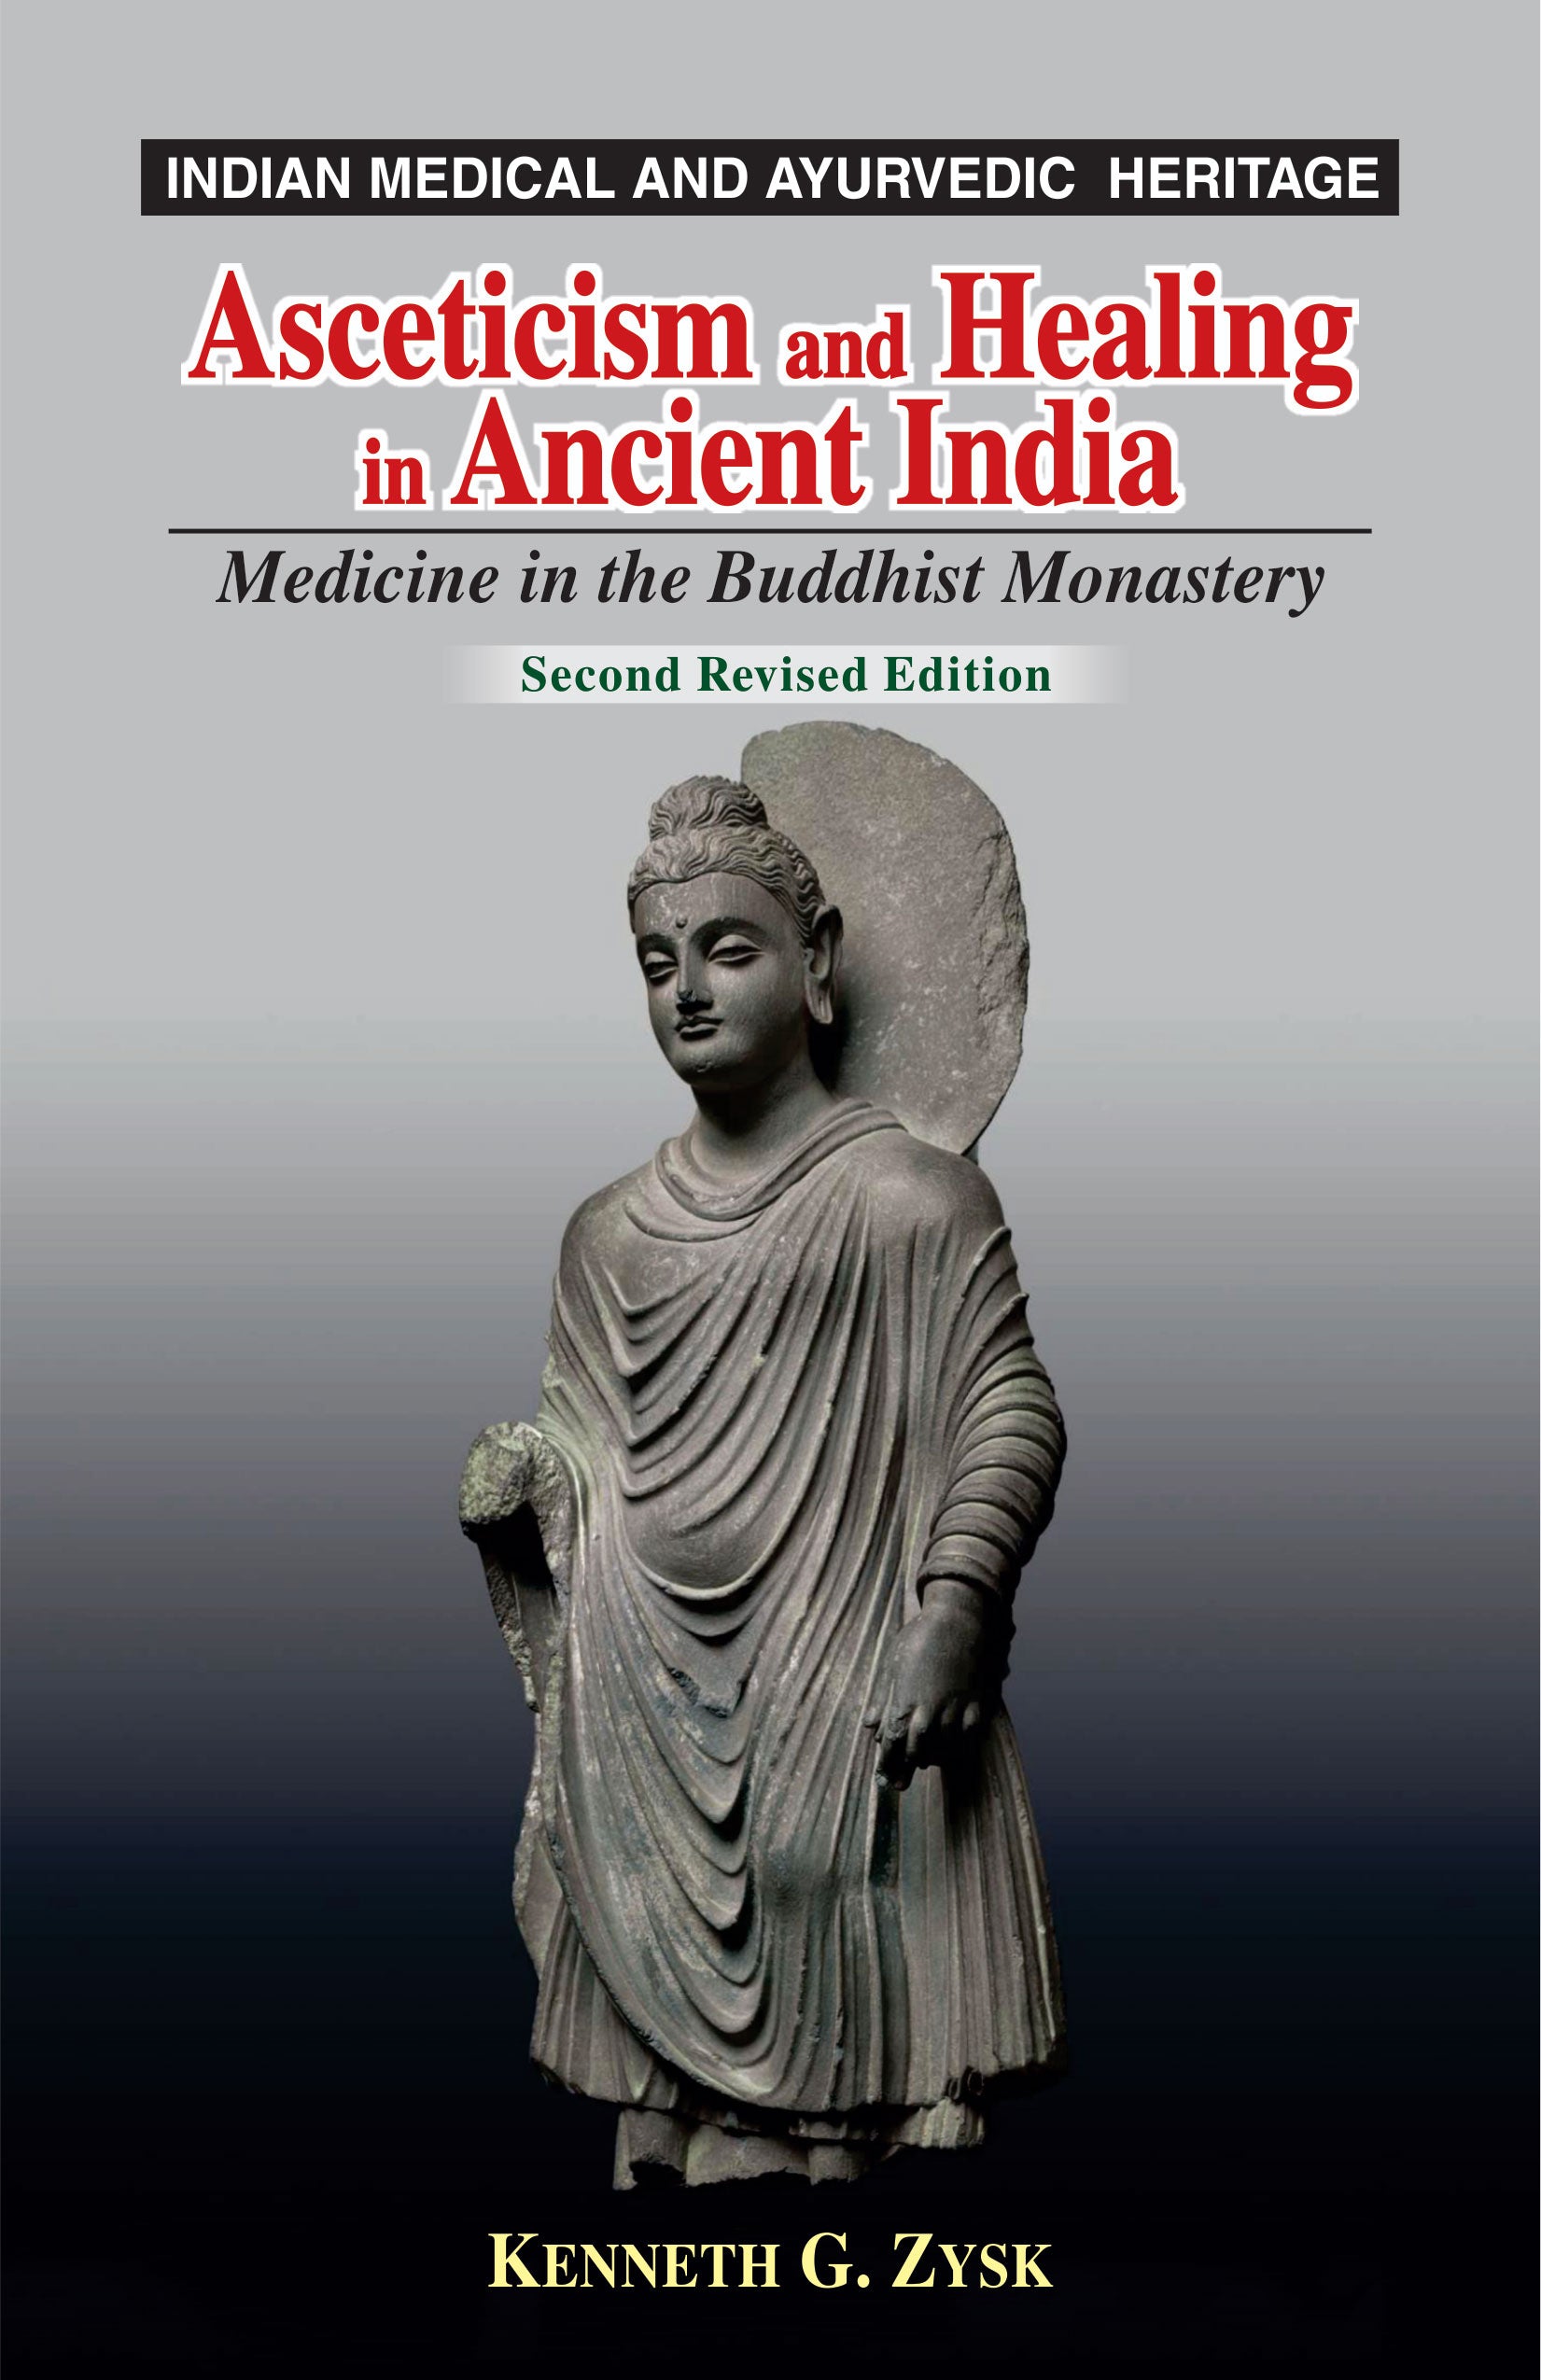 Asceticism and Healing in Ancient India: Medicine in the Buddhist Monastery